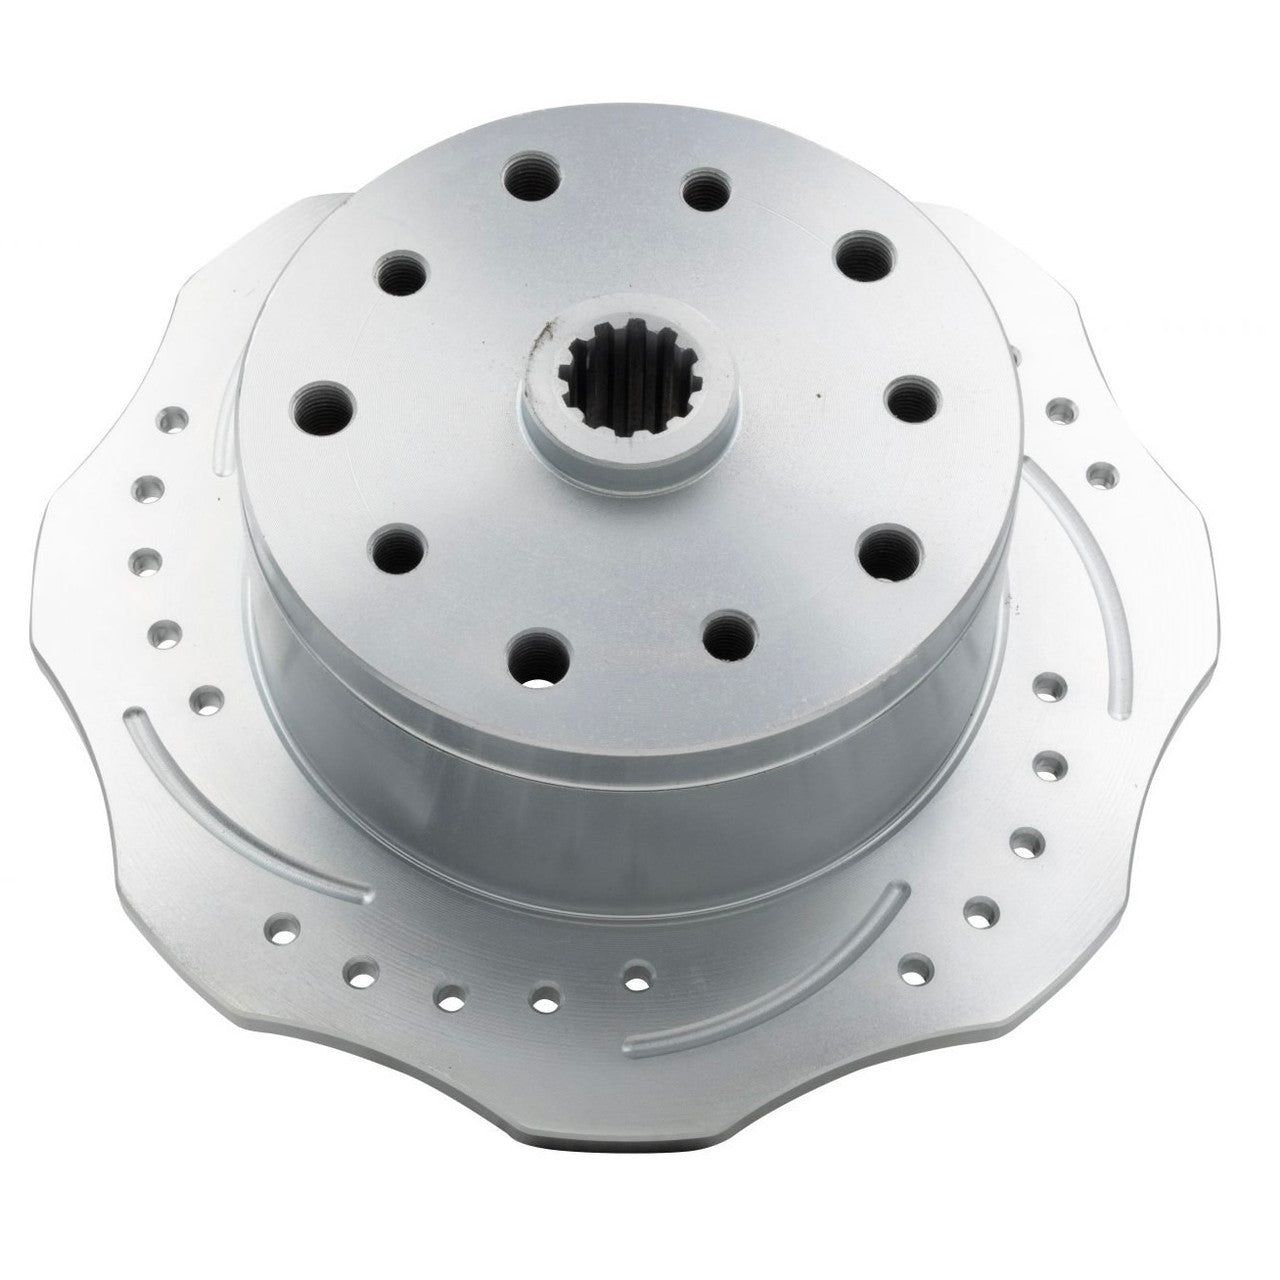 Empi 22-3876-7 Scalloped Brake Rotor, Left Rear. Double Drilled For Porsche 5x130mm Pattern Or Chevy 5x4.75”